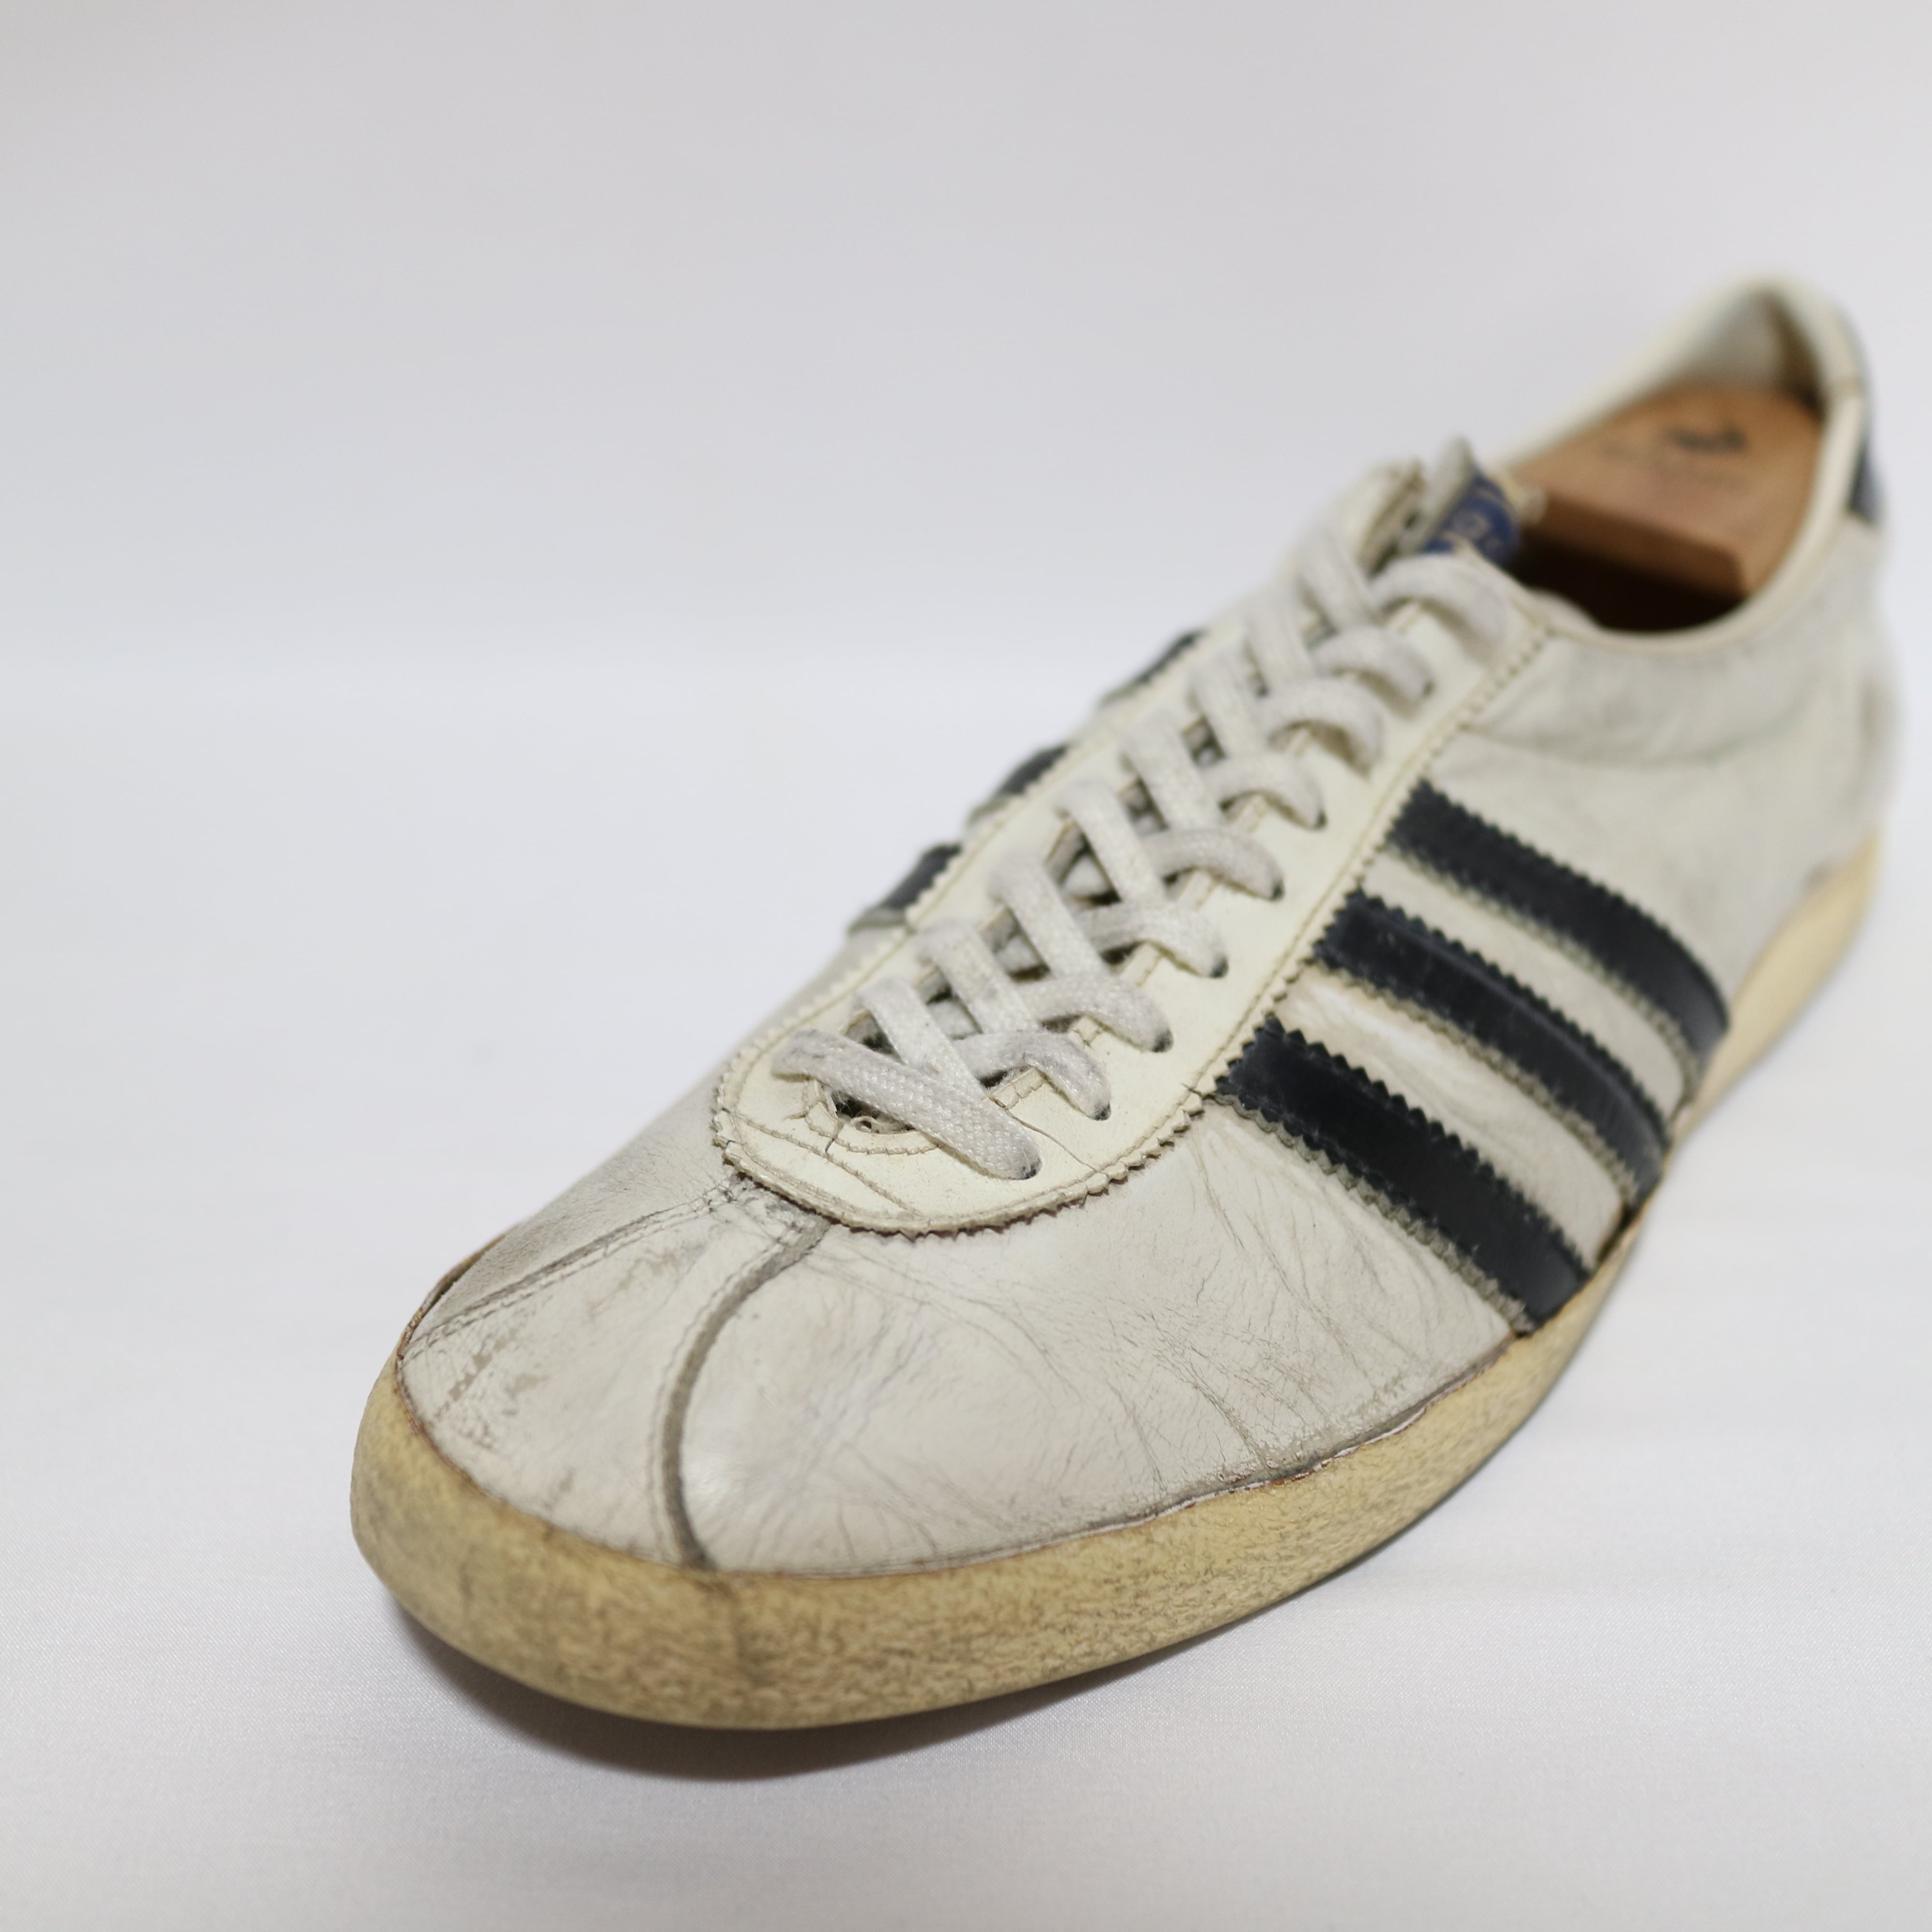 adidas / 70's Vintage Leather Sneaker 